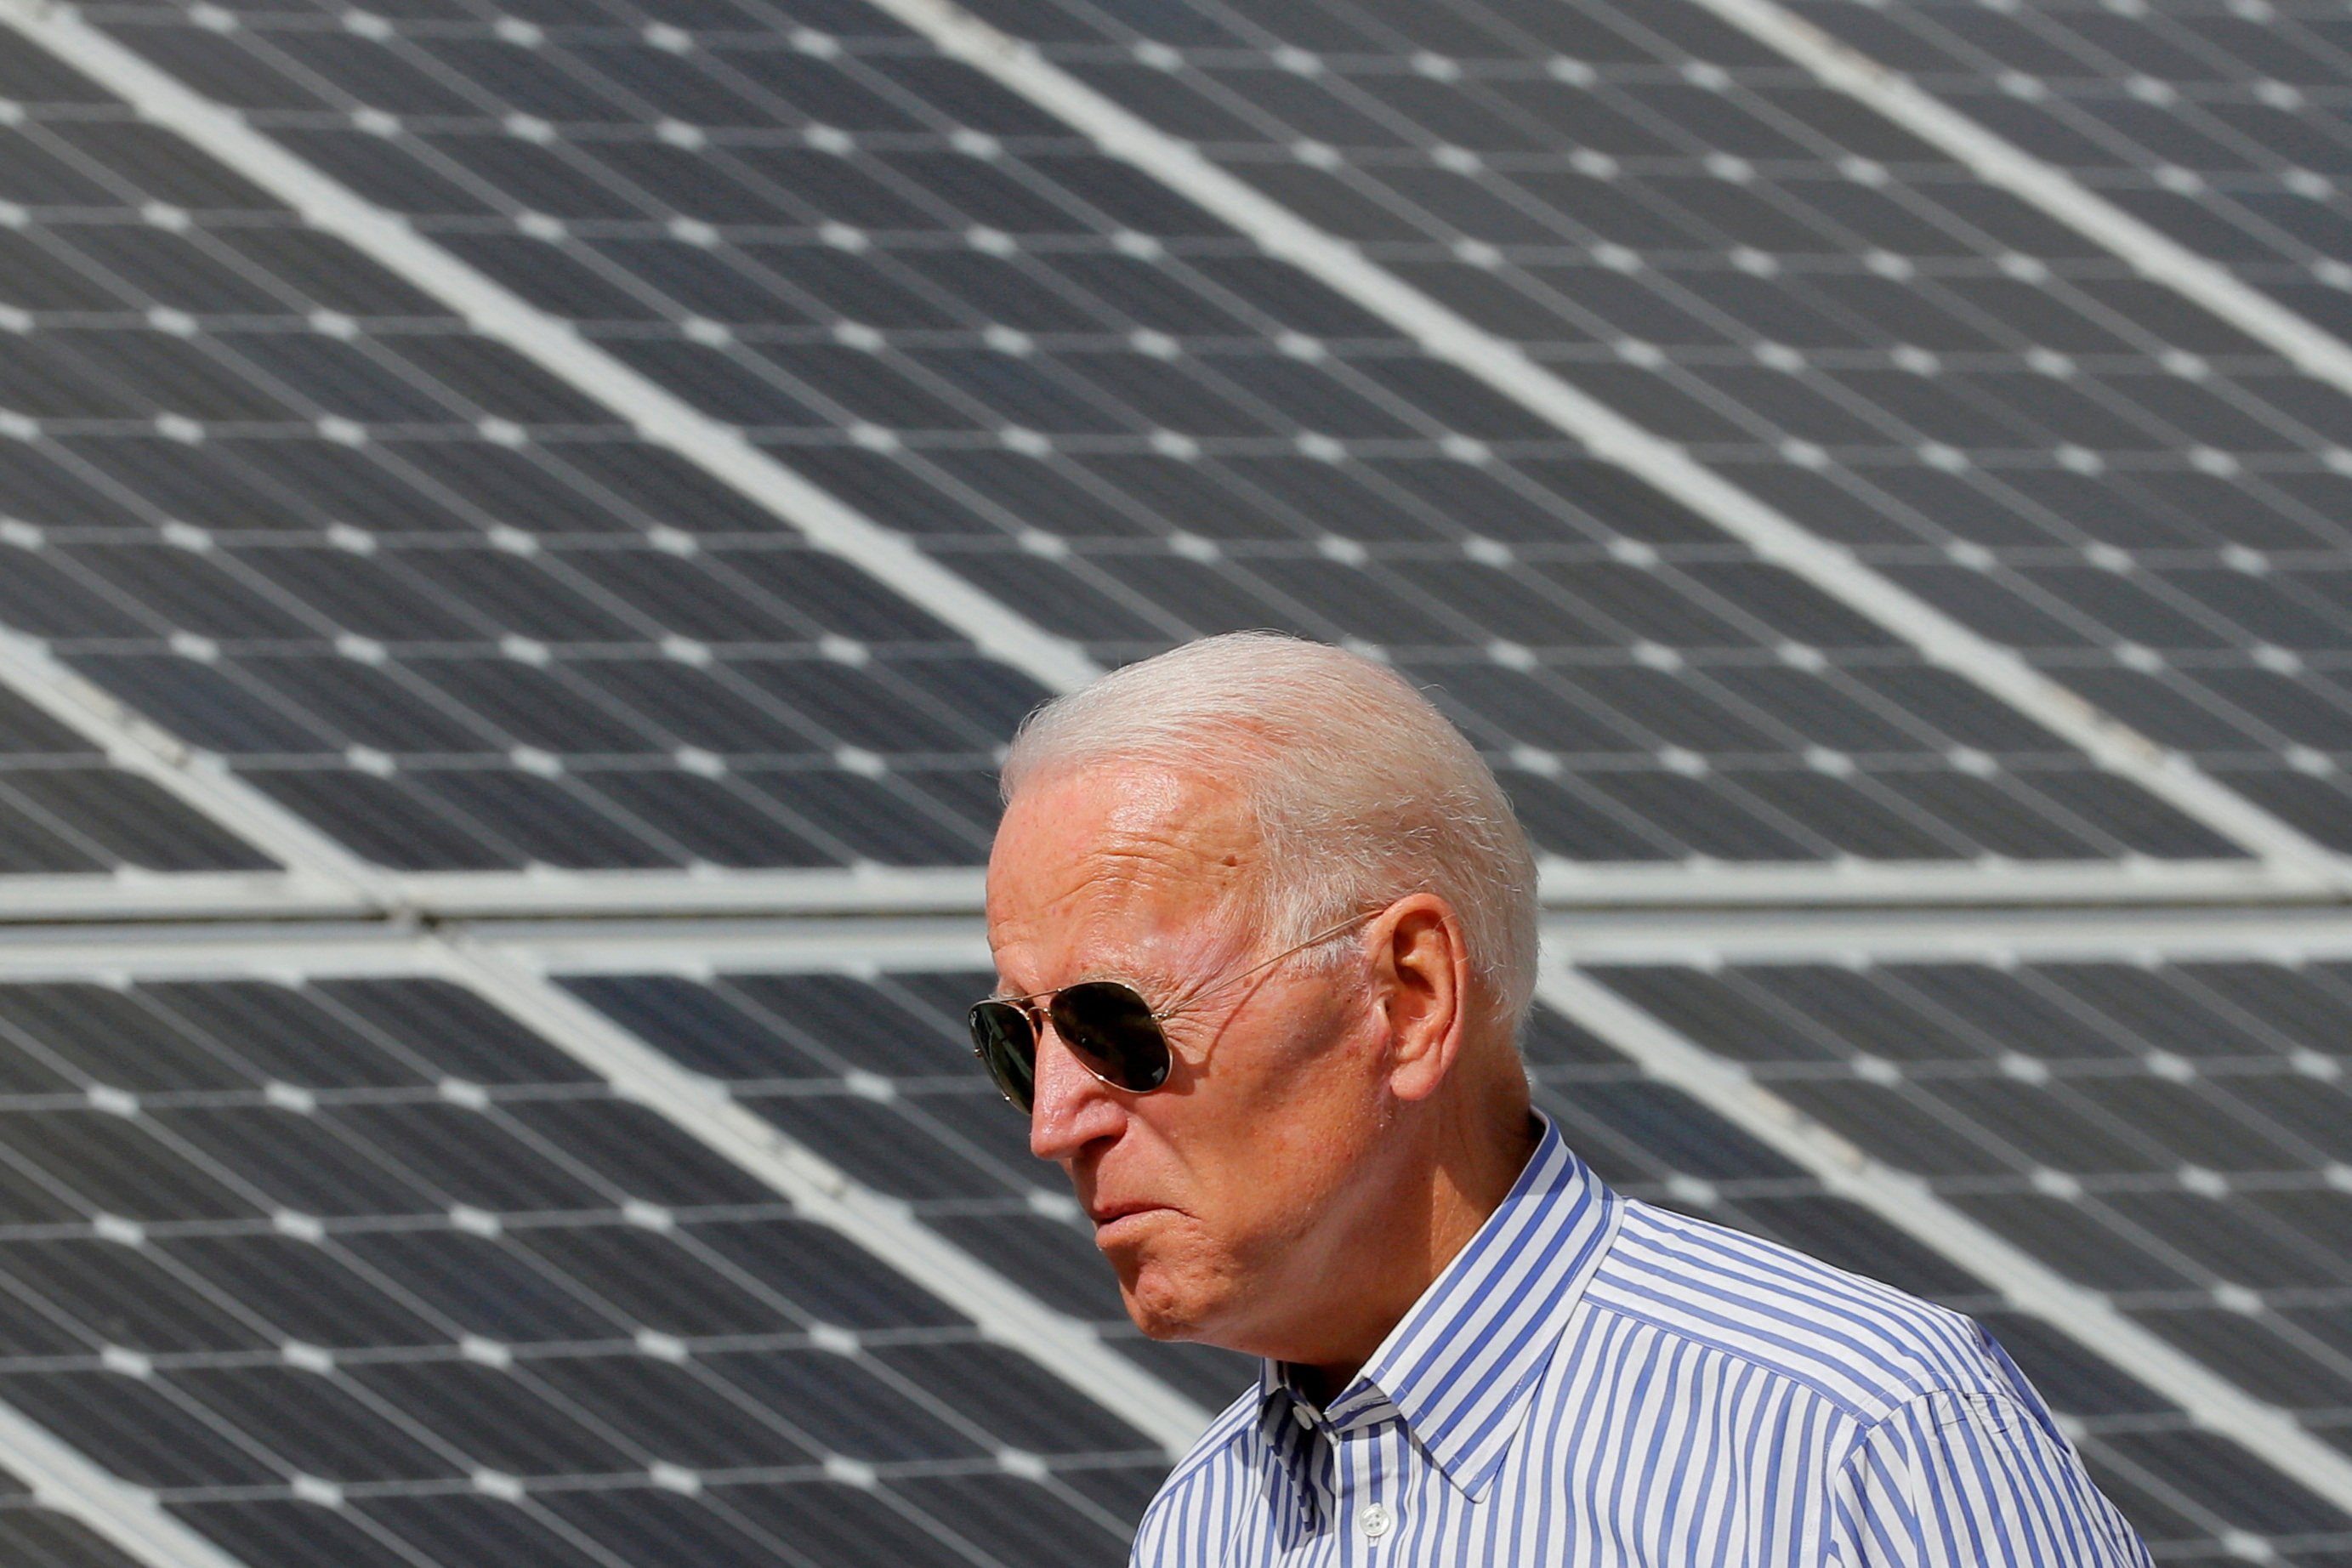 President Joe Biden walks past solar panels while touring the Plymouth Area Renewable Energy Initiative in June 2019. Photo: Reuters